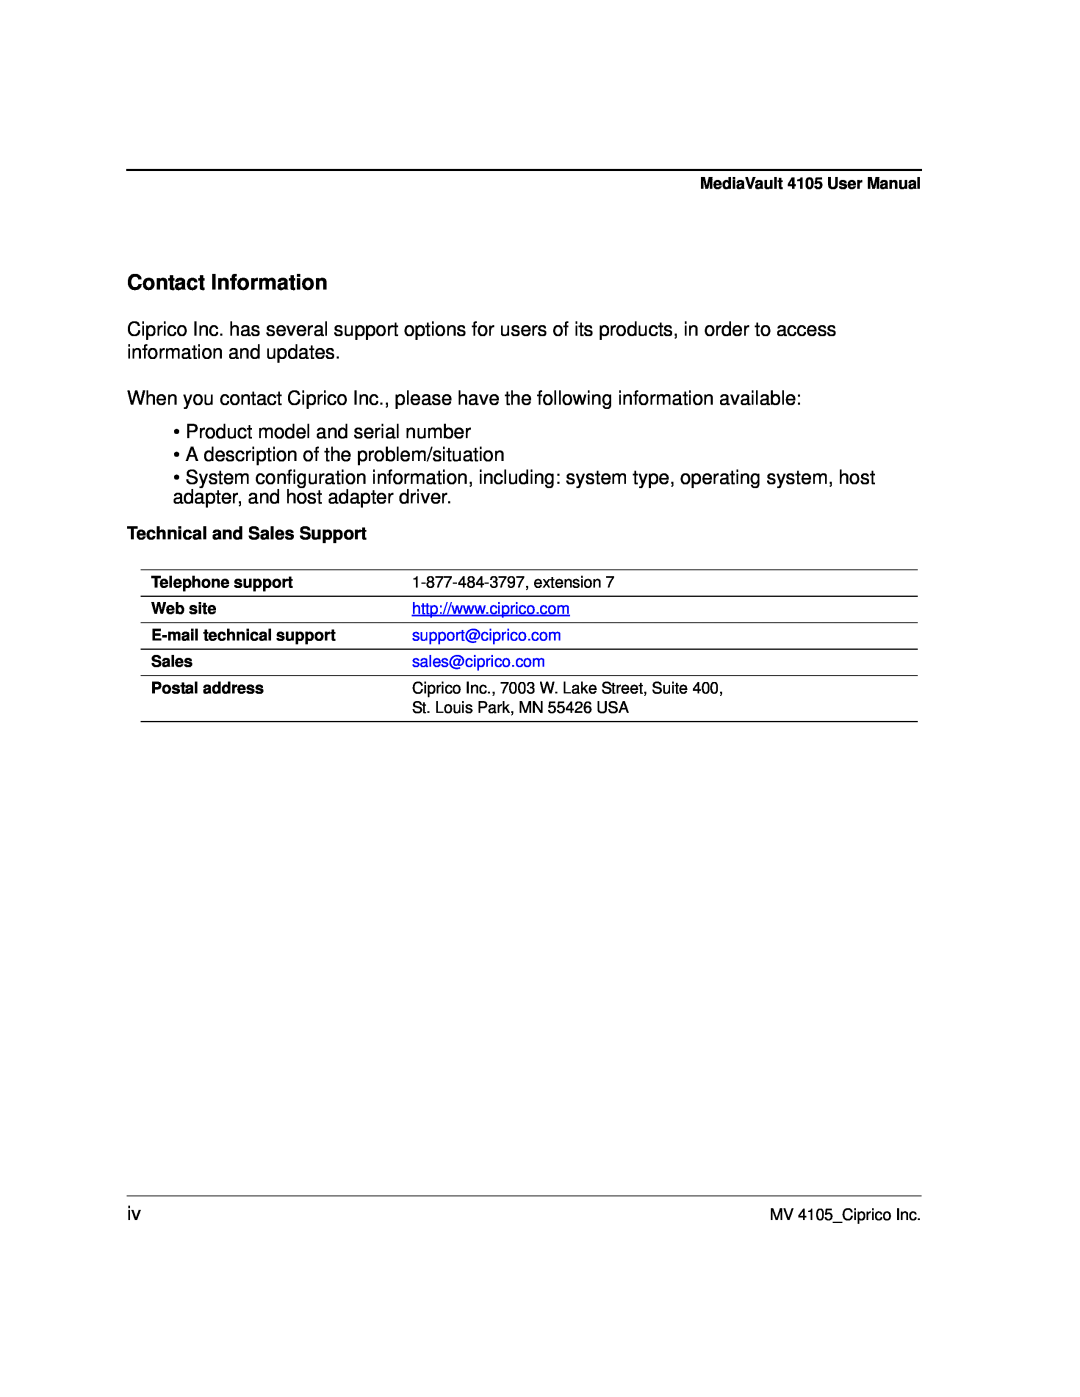 Ciprico 4105 Series user manual Contact Information 